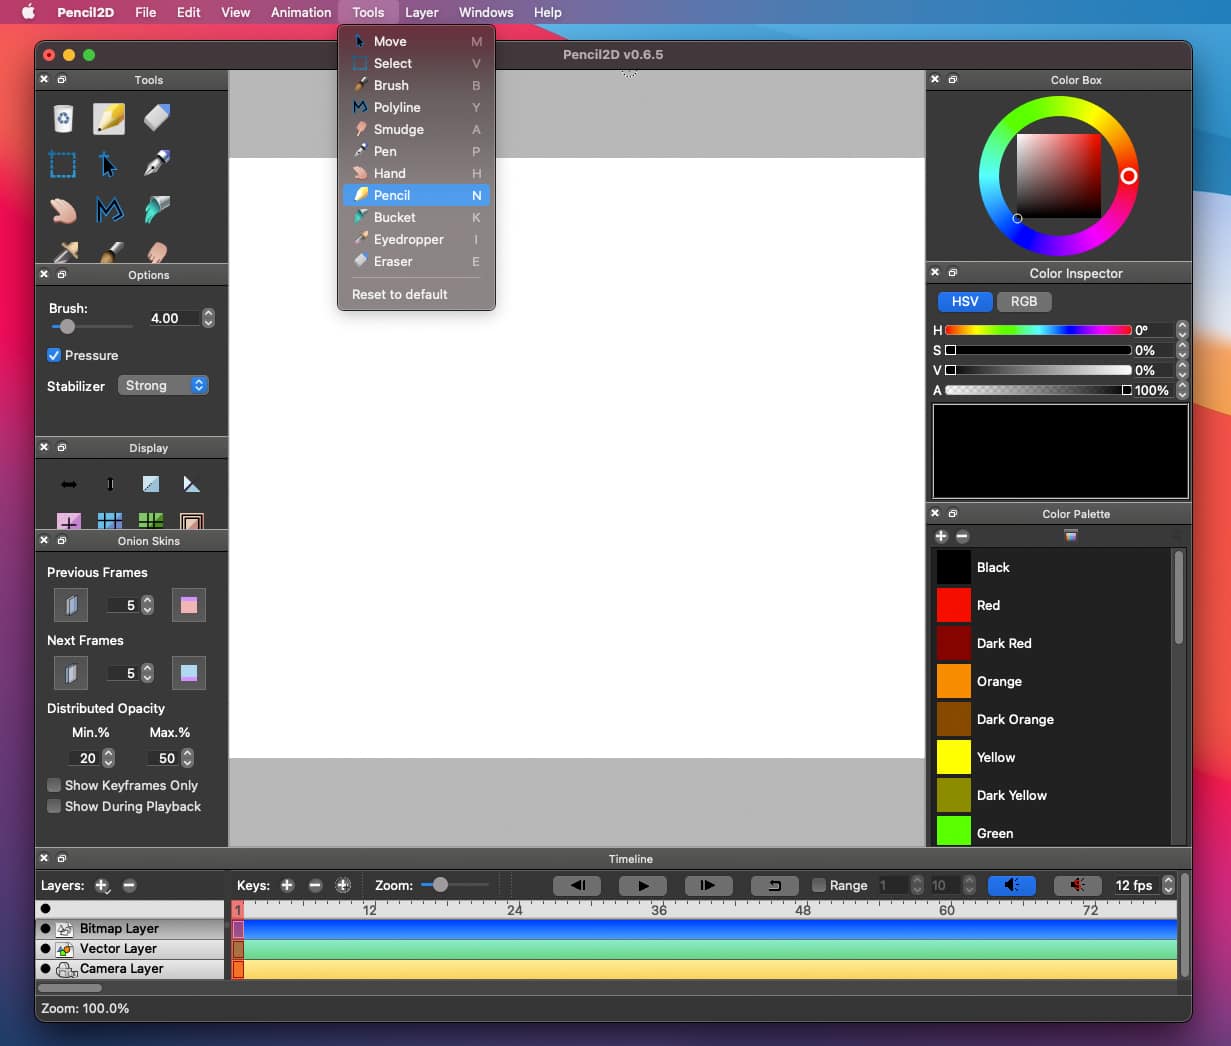 The 8 Best Free Drawing Software for Mac